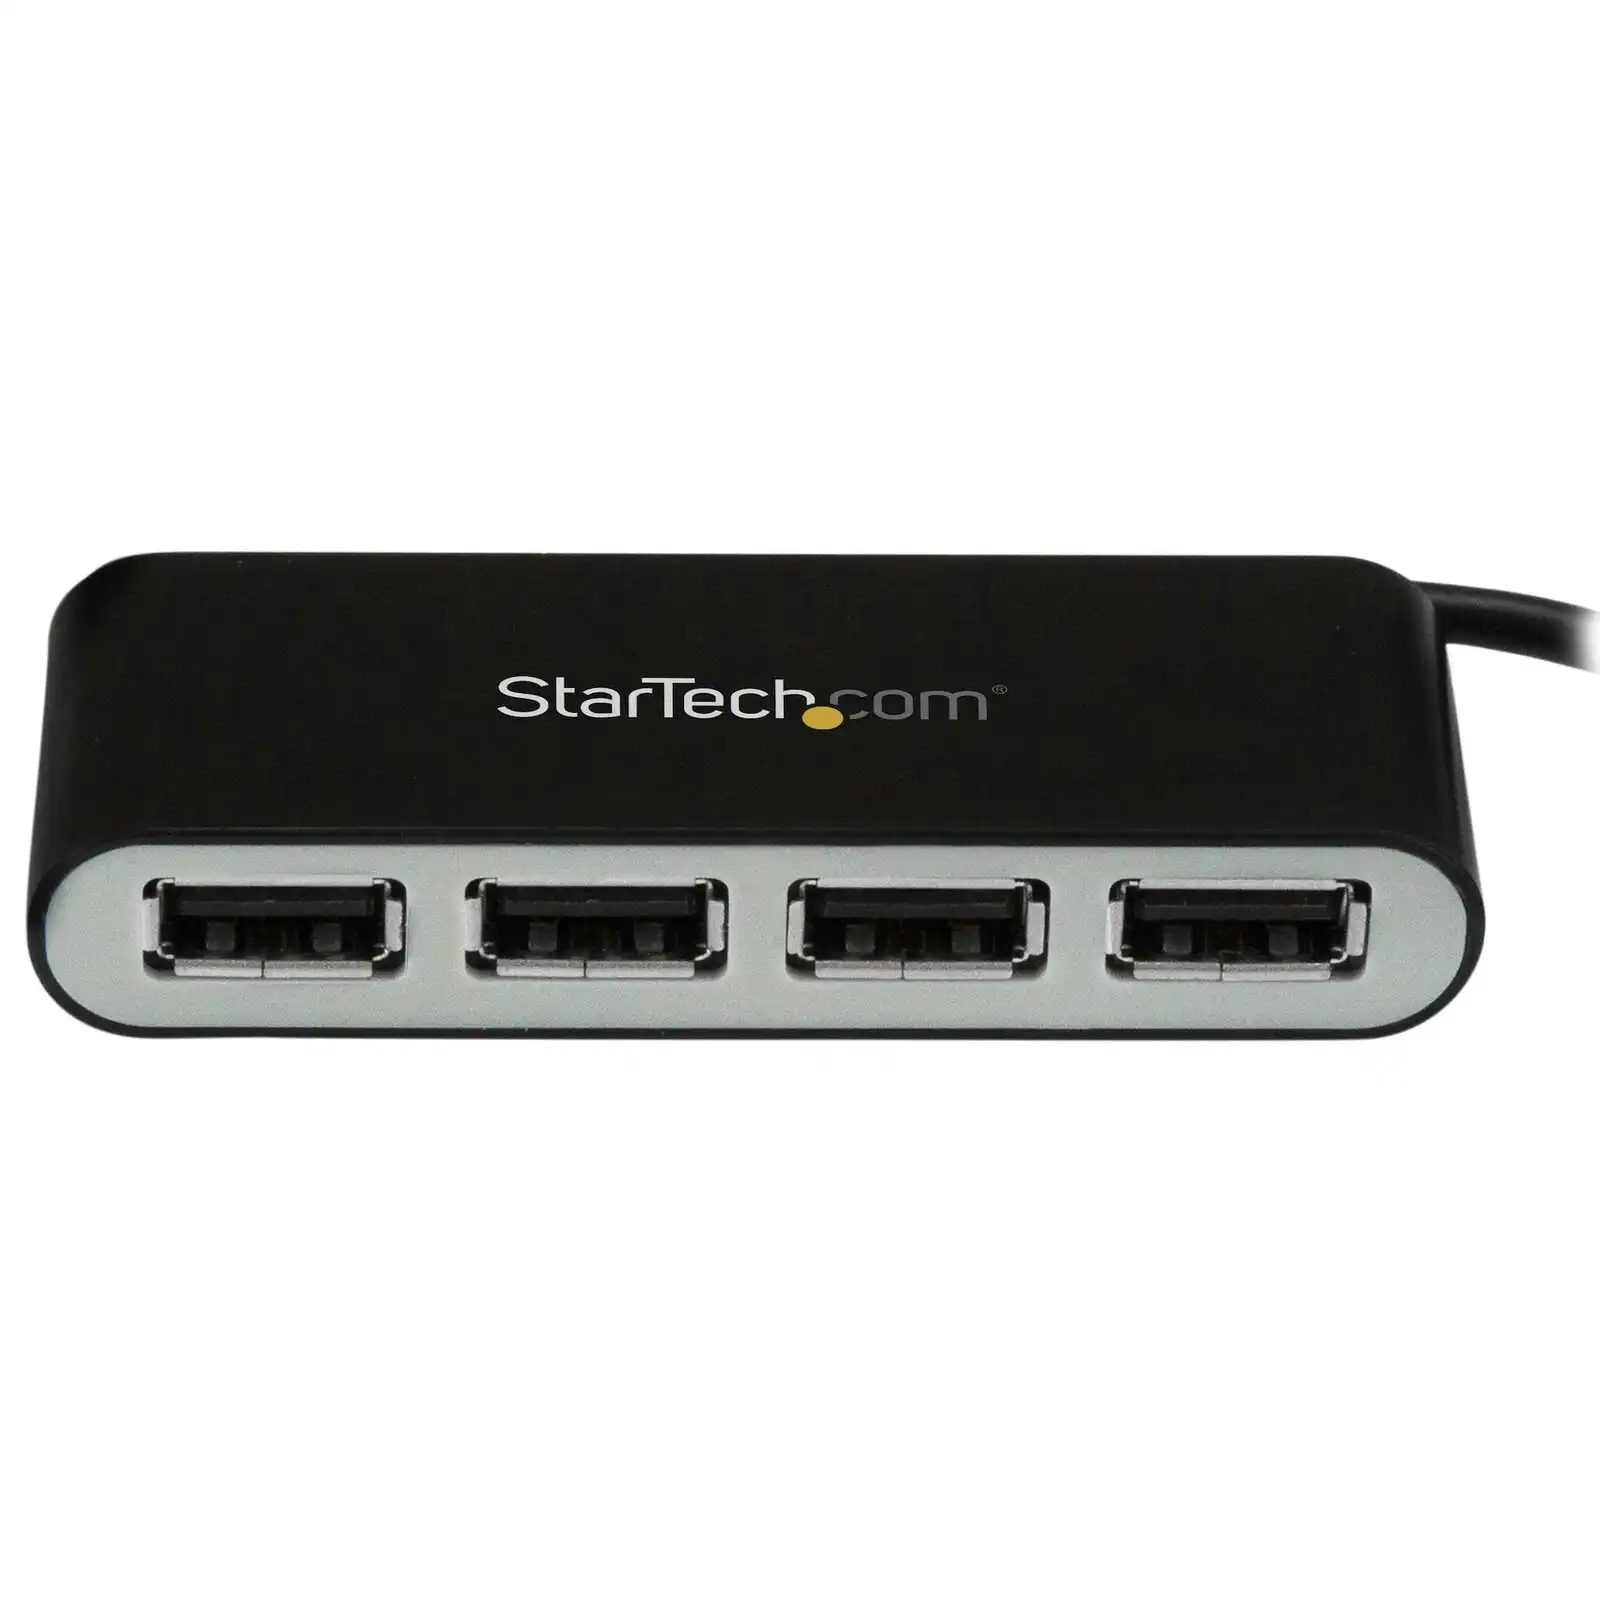 Star Tech 4-Port Portable USB 2.0 Hub w/ Built-in Cable For PC/Laptop BLK & SLV